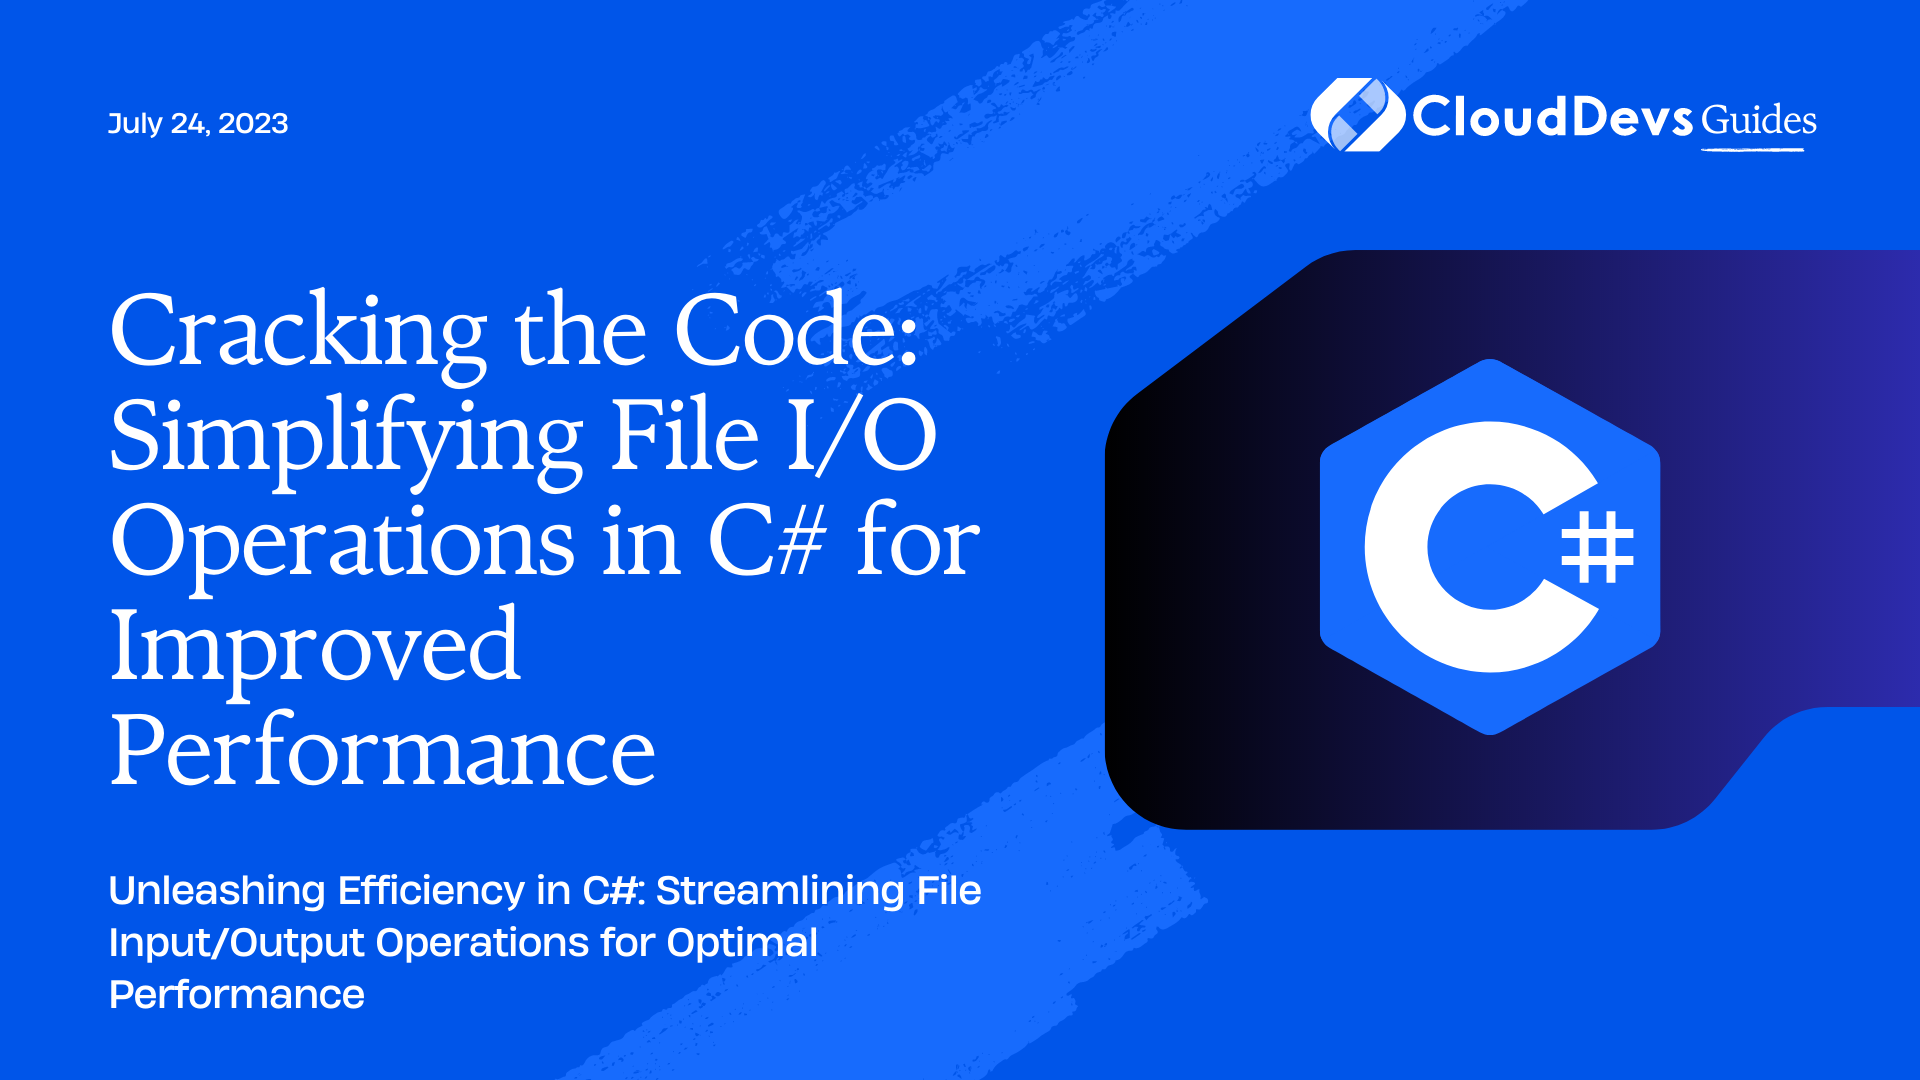 Cracking the Code: Simplifying File I/O Operations in C# for Improved Performance